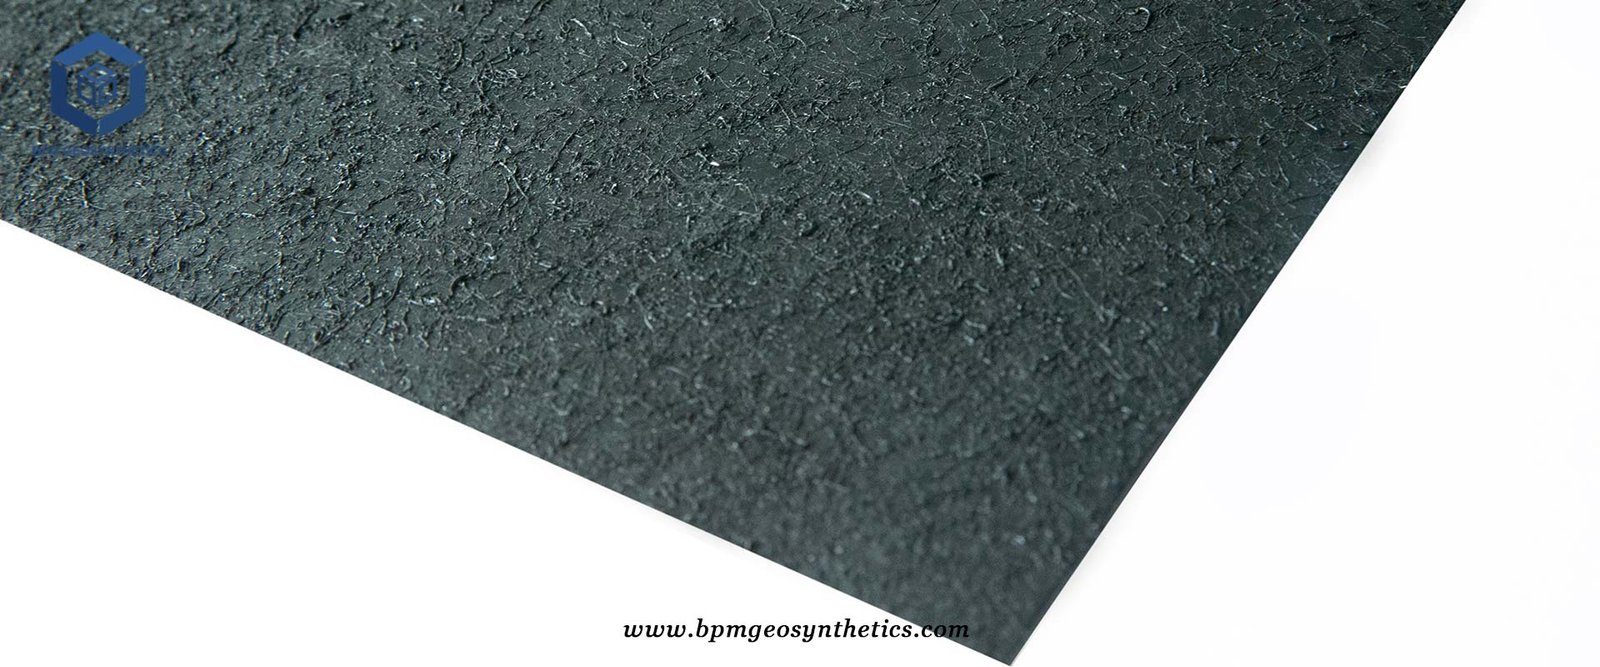 HDPE Textured Geomembrane Liner for Chevron Petroleum Project